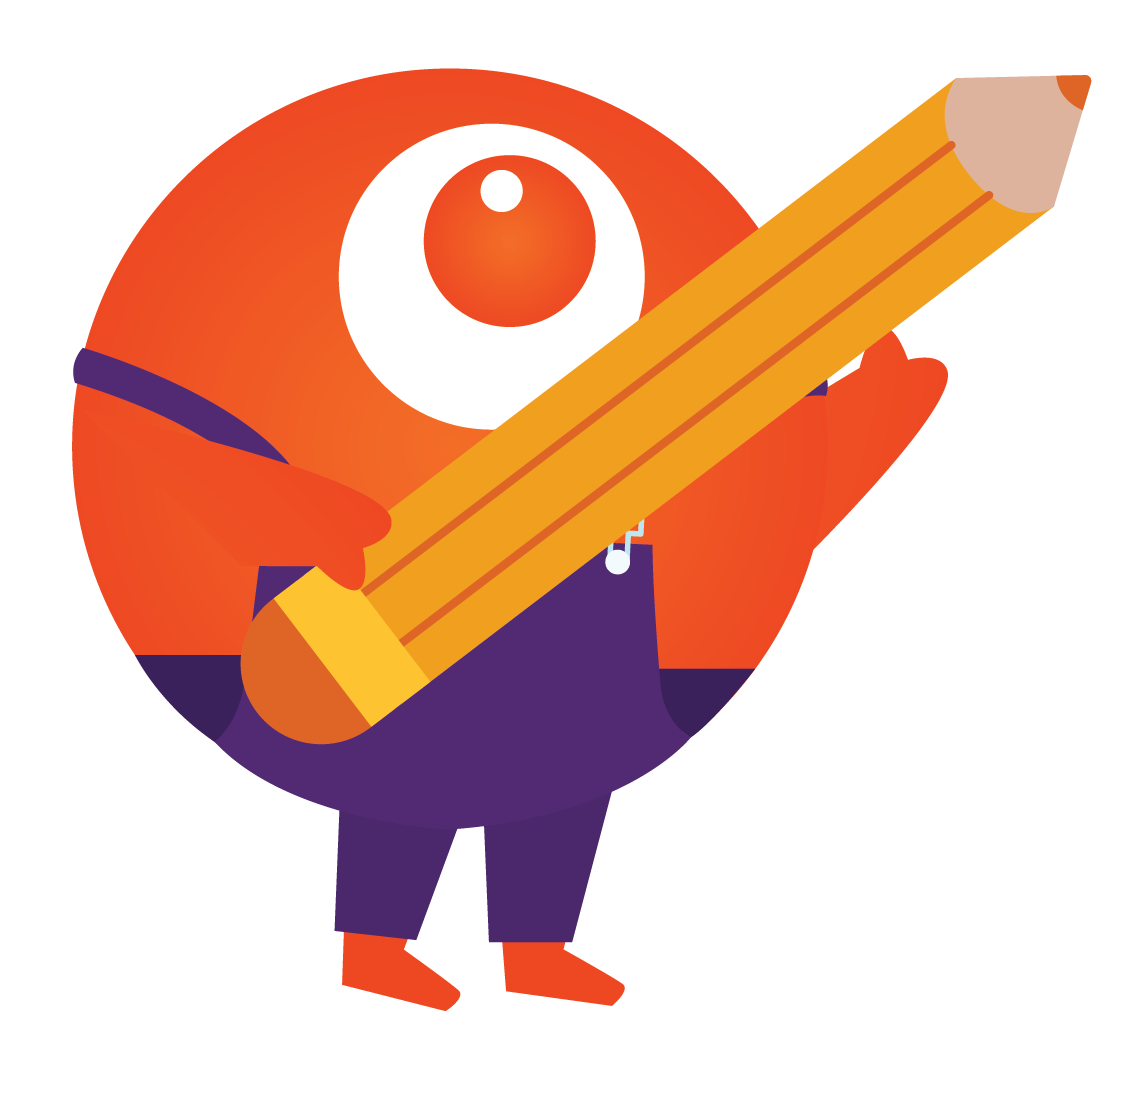 Orange zoy character in overalls holding a giant pencil